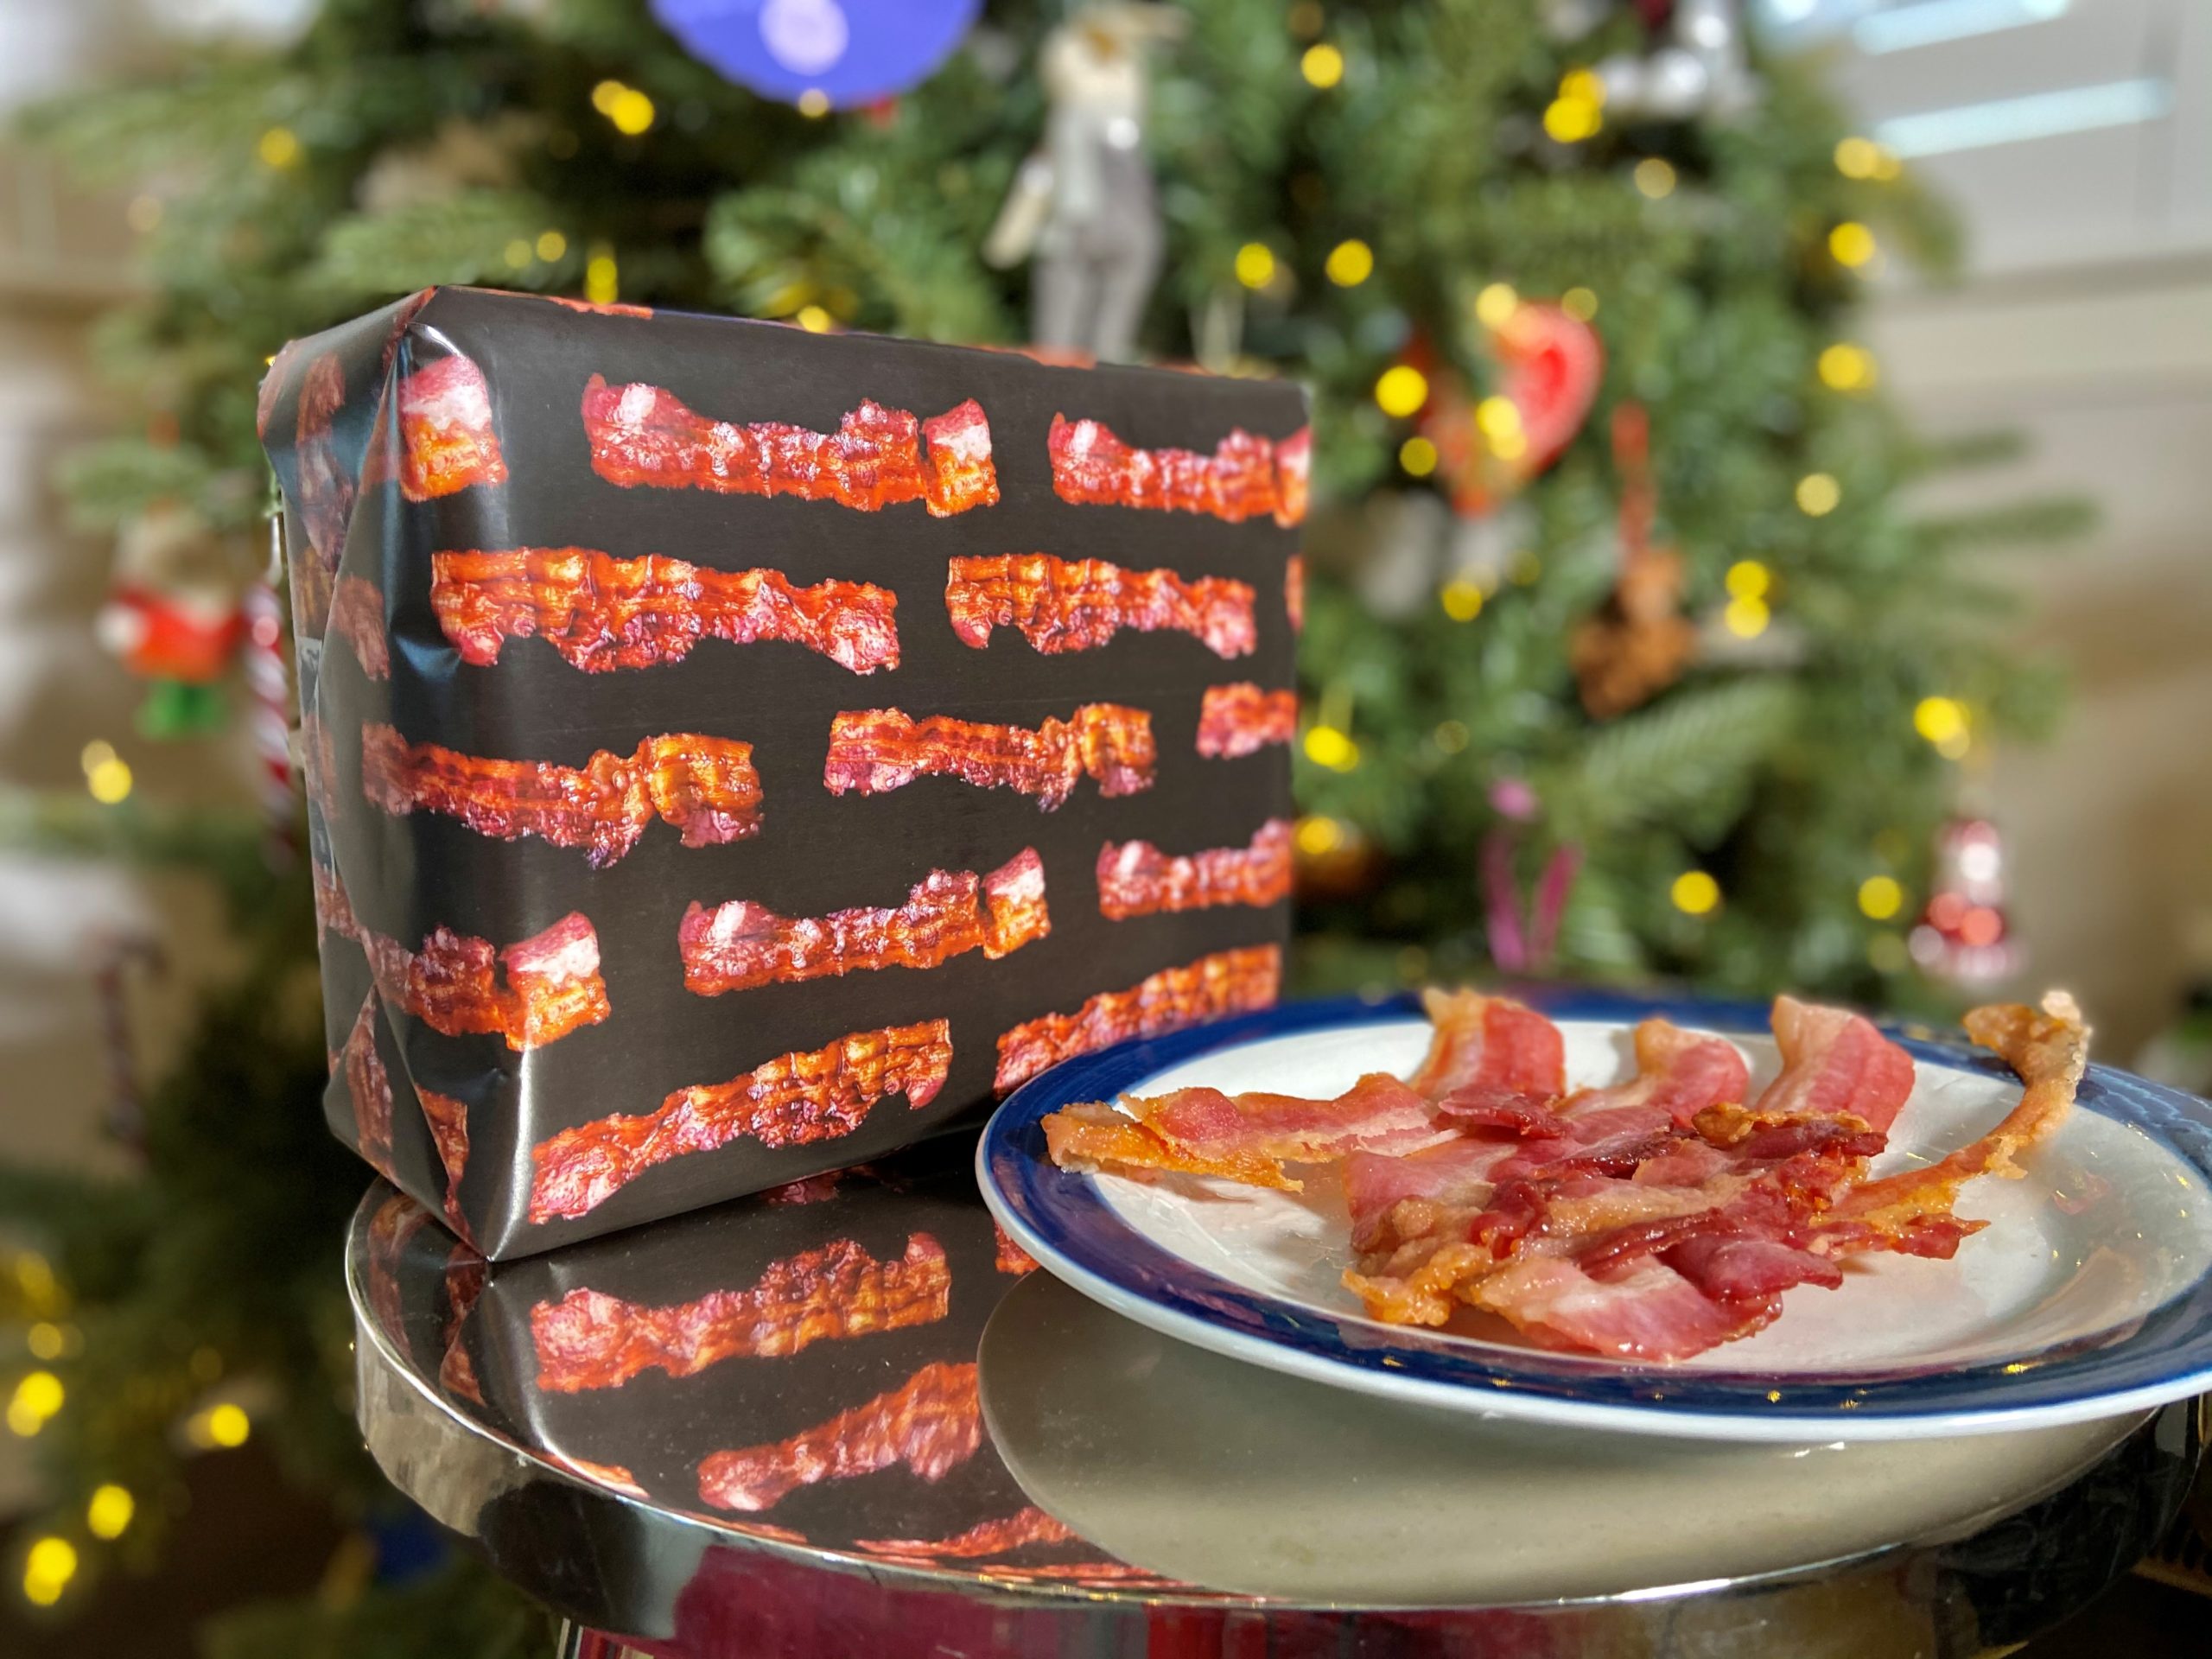 Fried Eggs and Bacon Wrapping Paper by AttireCode